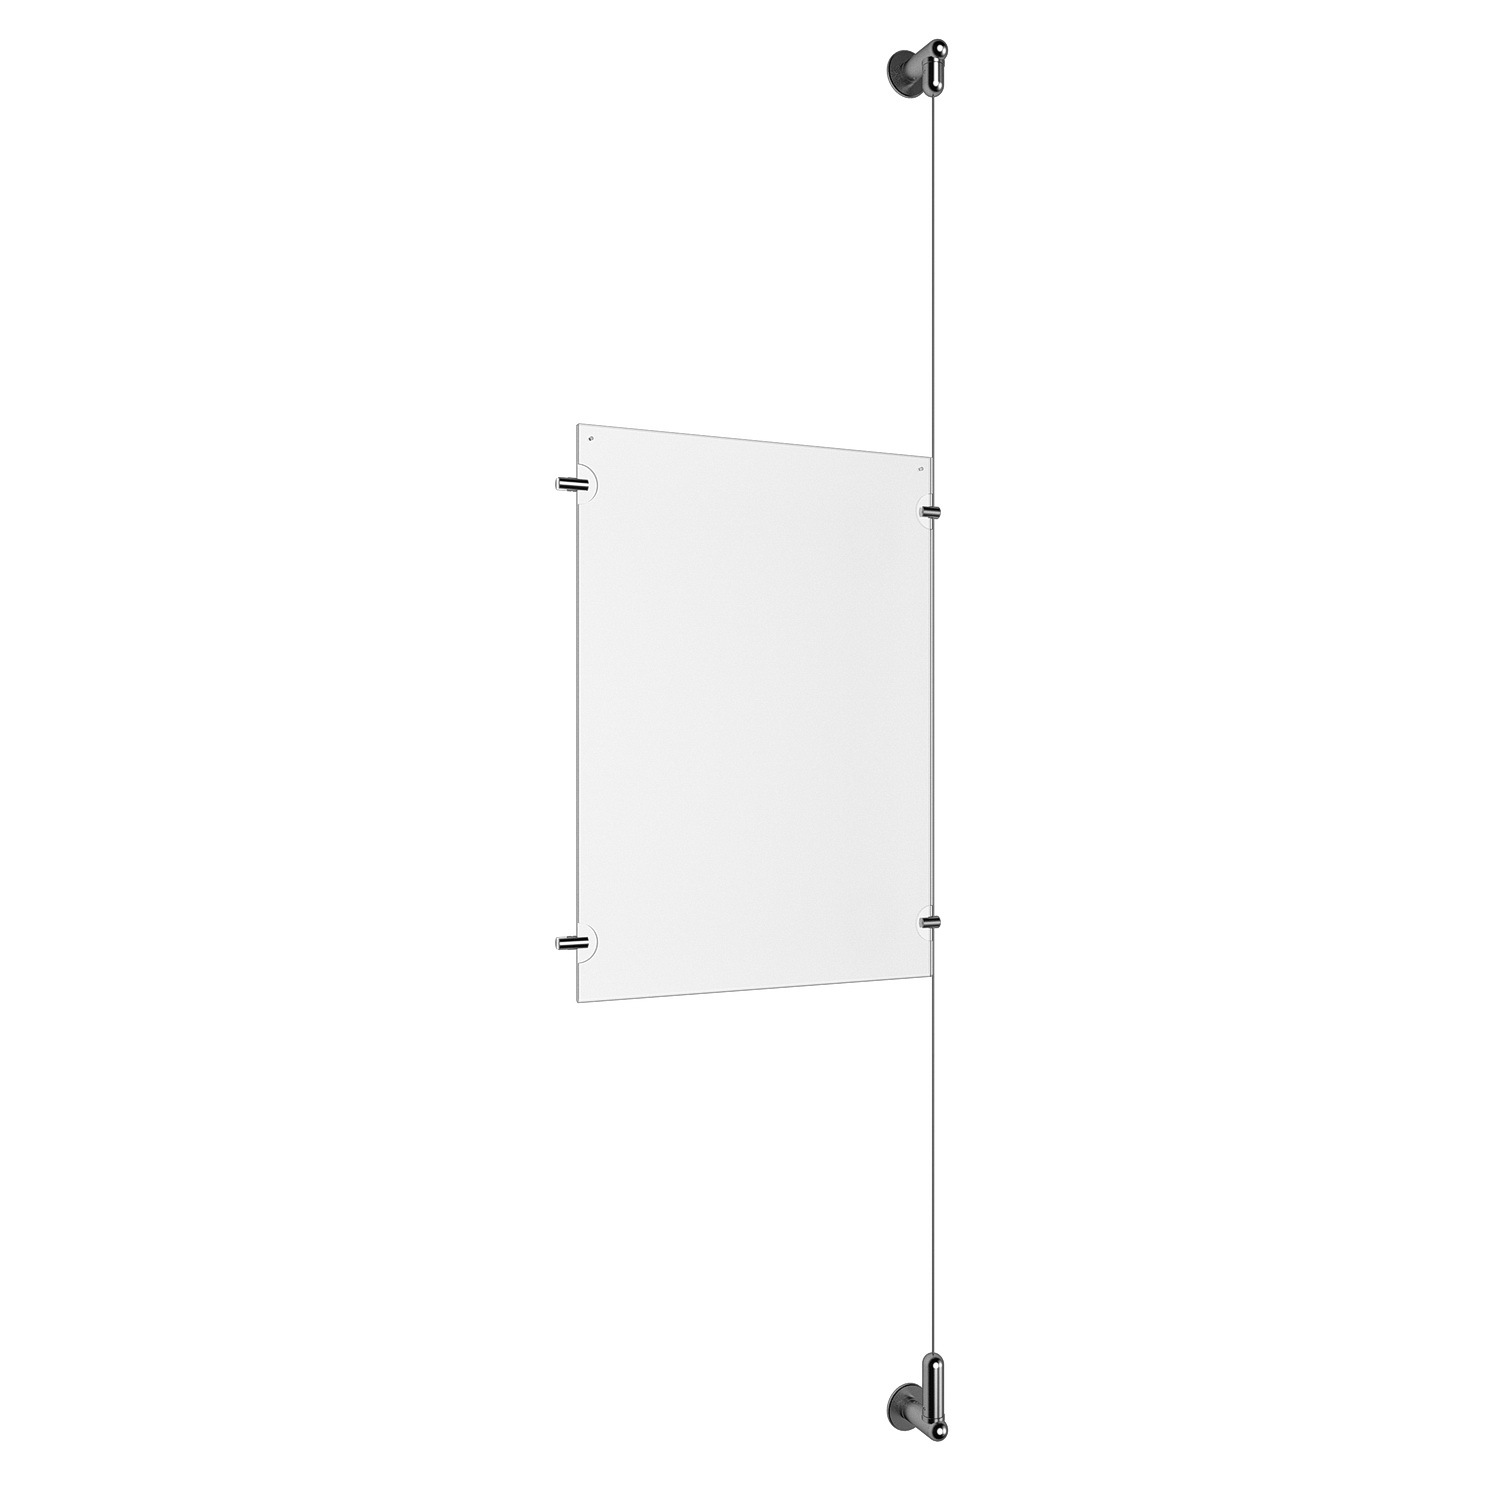 (1) 11'' Width x 17'' Height Clear Acrylic Frame & (1) Wall-to-Wall Aluminum Clear Anodized Cable Systems with (2) Single-Sided Panel Grippers (2) Double-Sided Panel Grippers